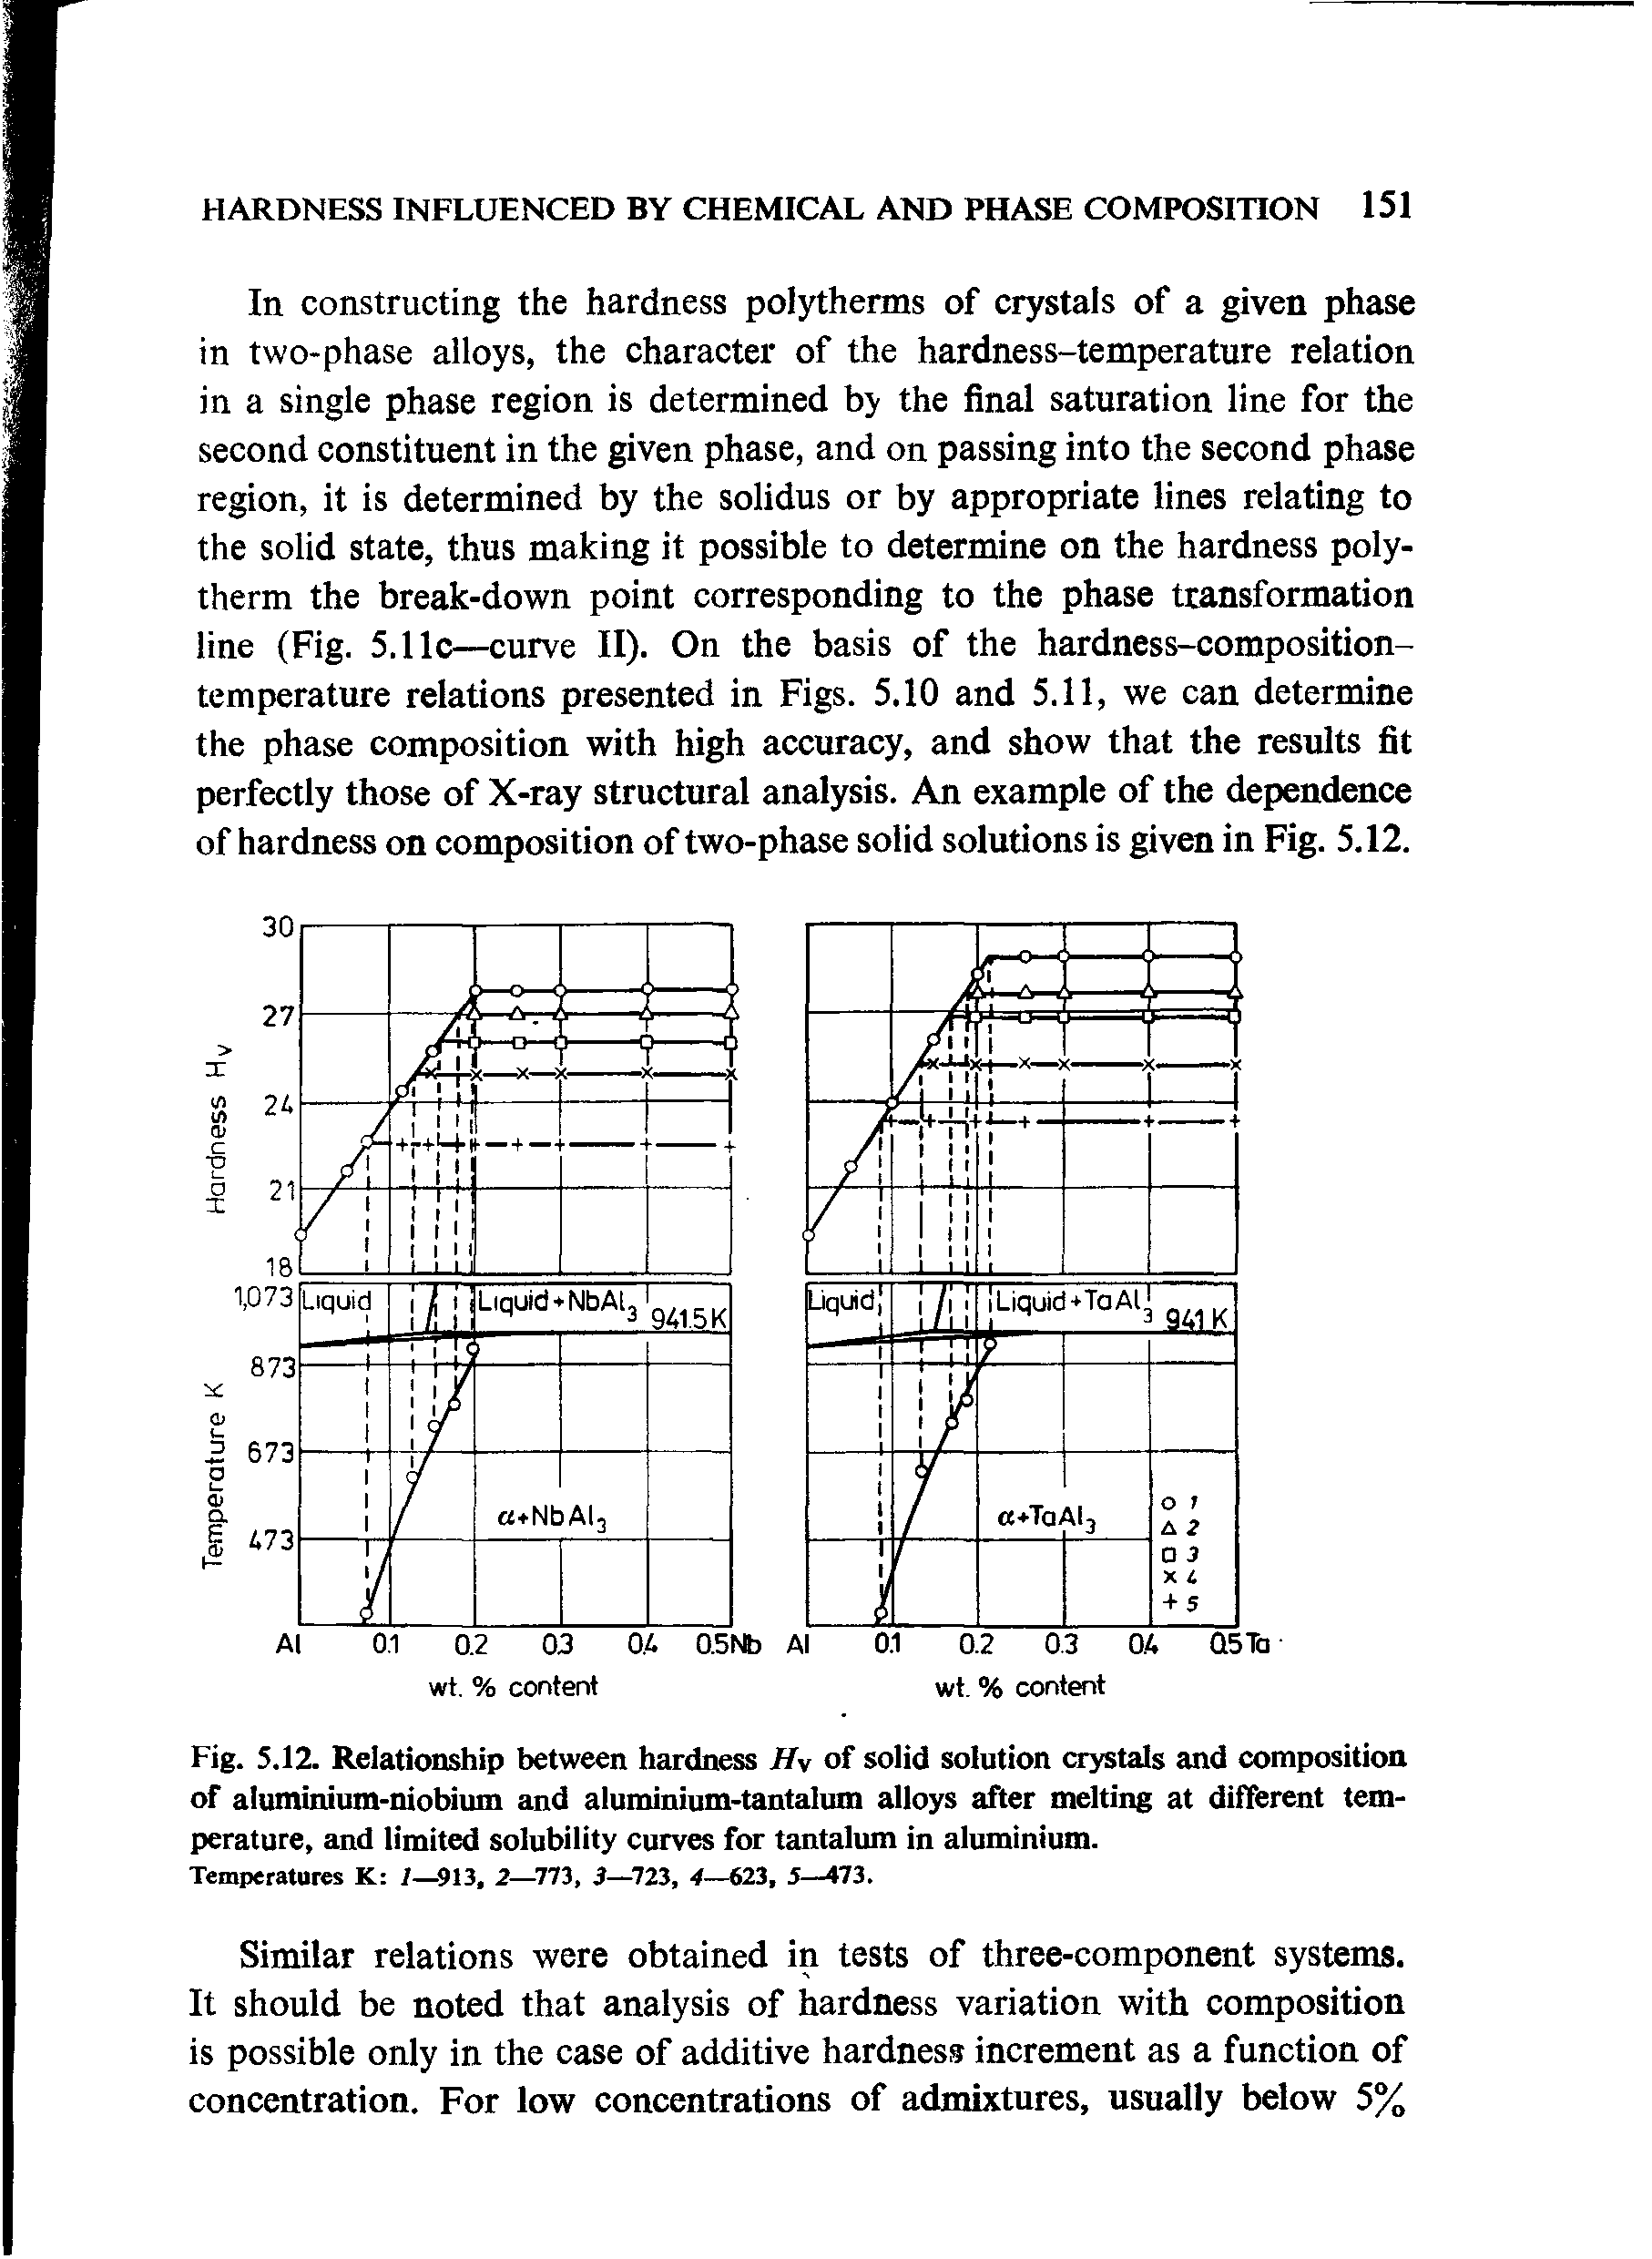 Fig. 5.12. Relationship between hardness H of solid solution crystals and composition of aluminium-niobium and aluminium-tantalum alloys after melting at different temperature, and limited solubility curves for tantalum in aluminium.